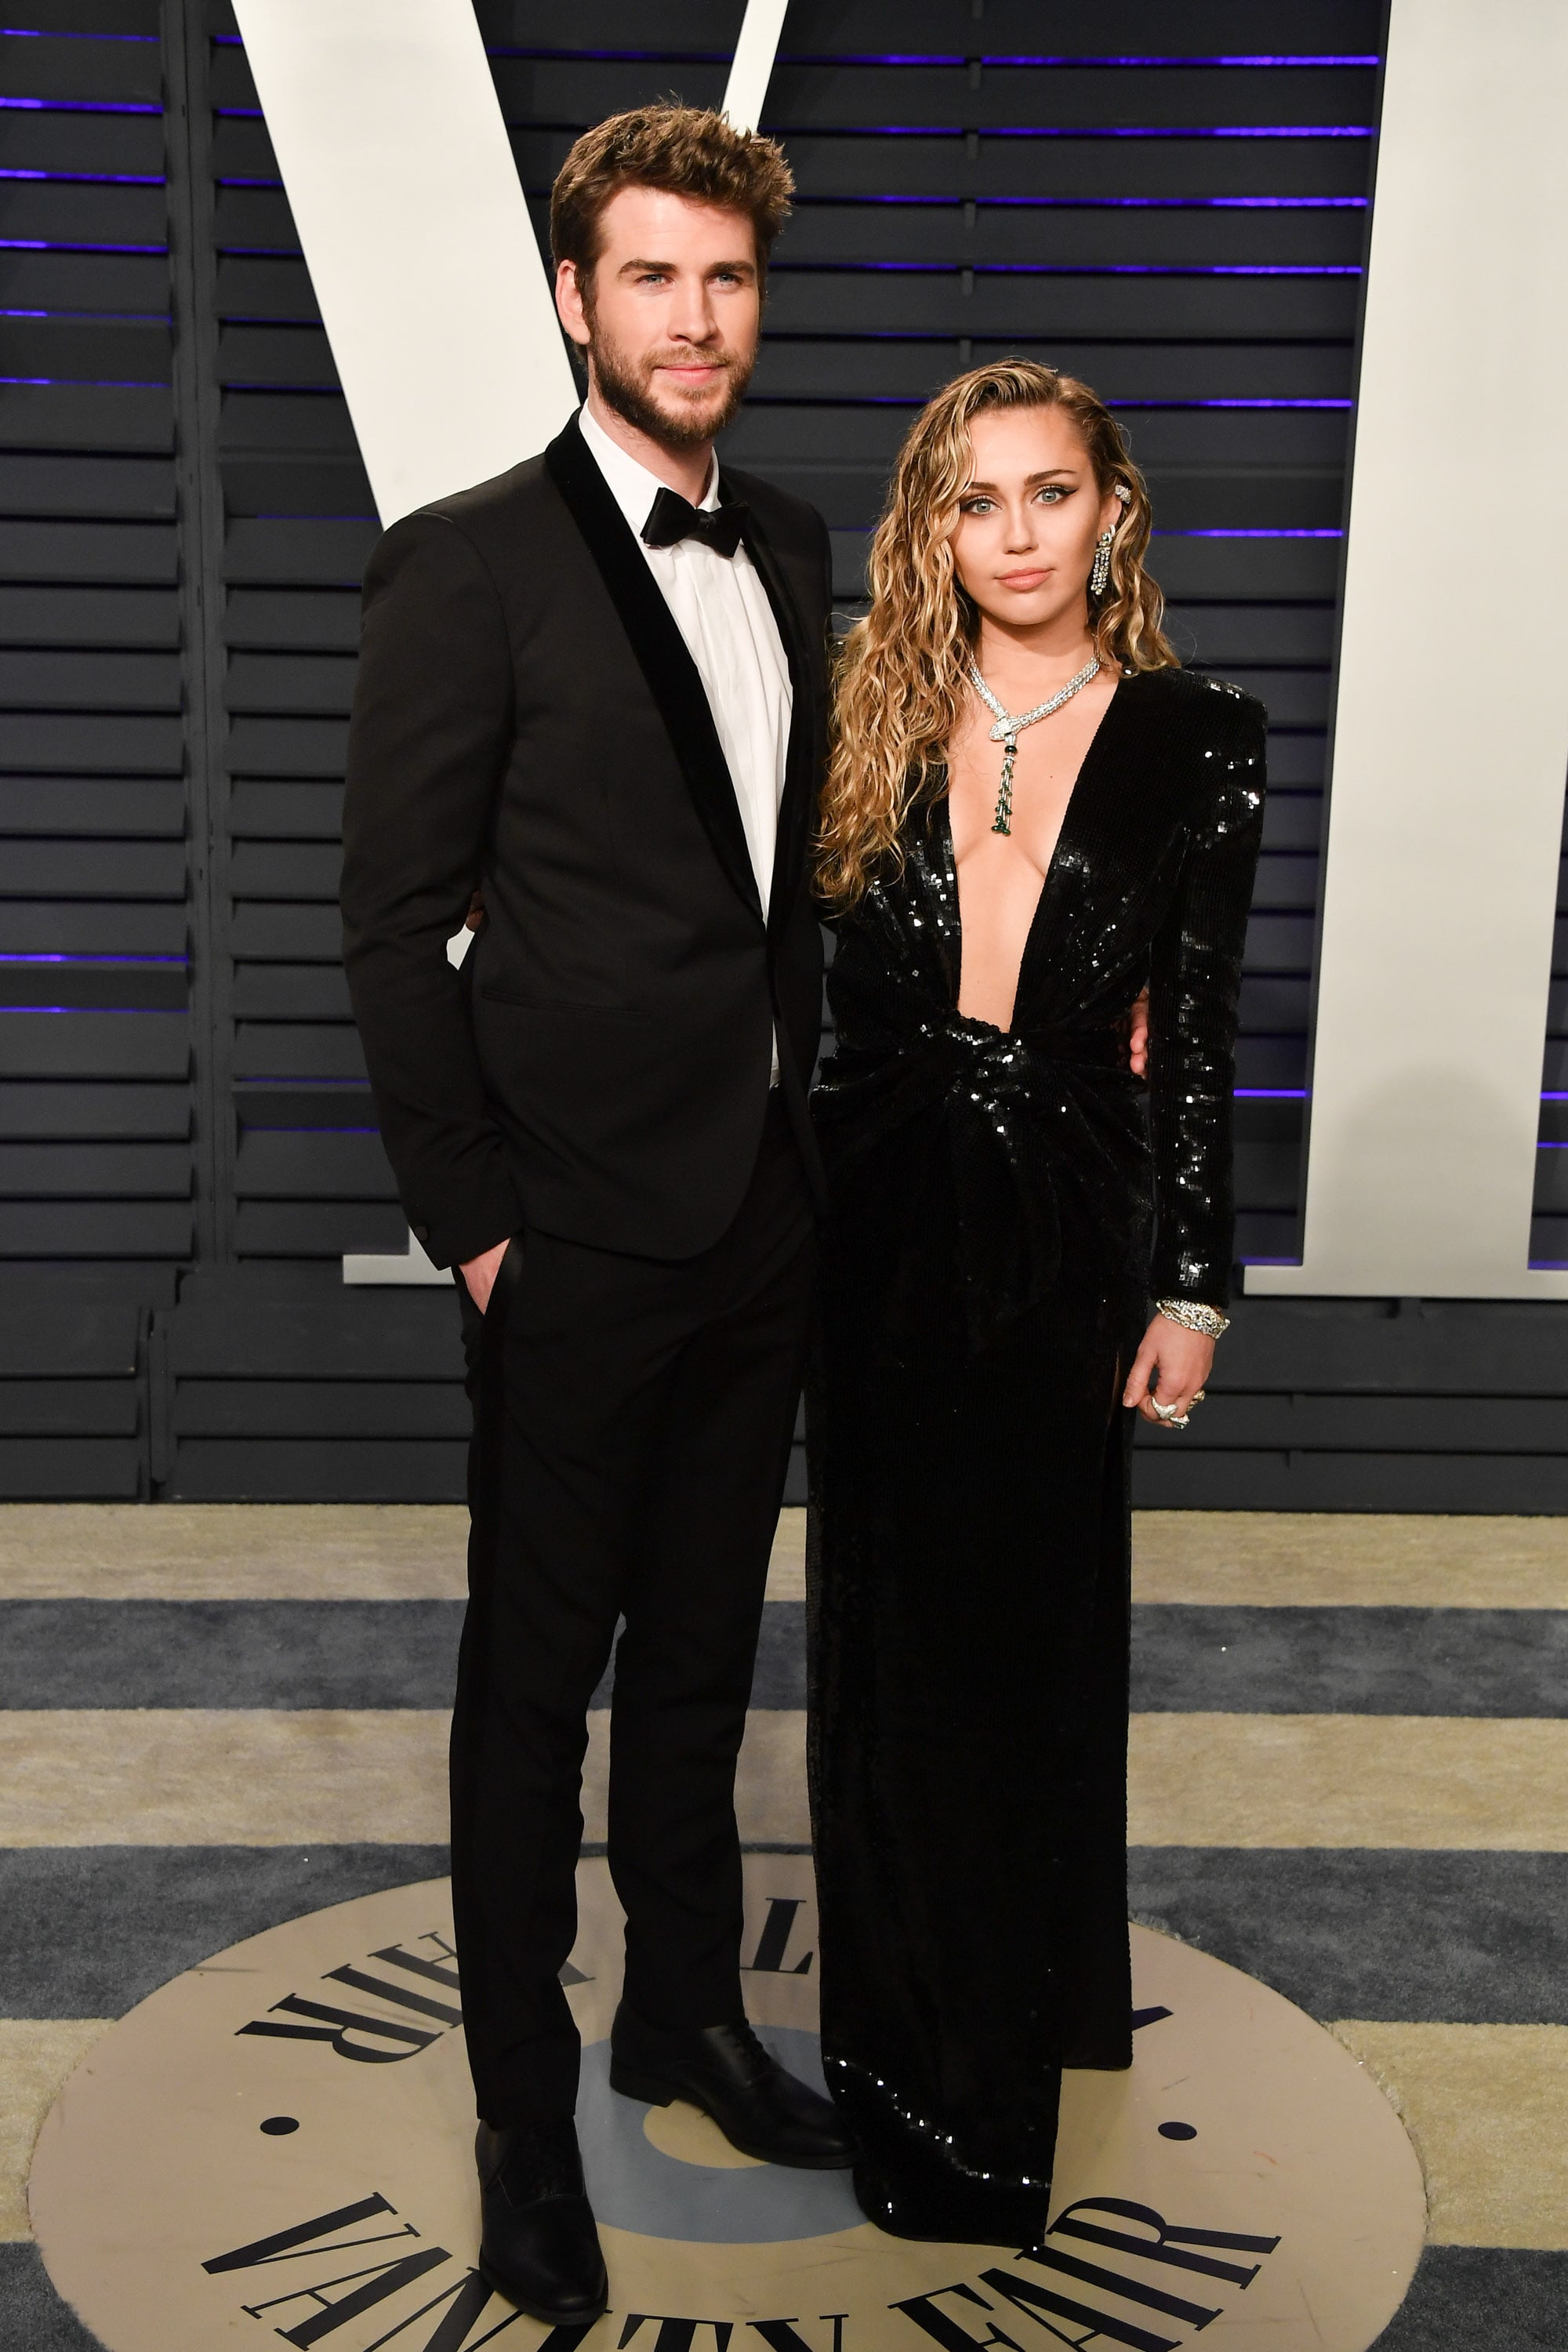 BEVERLY HILLS, CALIFORNIA - FEBRUARY 24: Liam Hemsworth and Miley Cyrus attend the 2019 Vanity Fair Oscar Party hosted by Radhika Jones at Wallis Annenberg Centre for the Performing Arts on February 24, 2019 in Beverly Hills, California. (Photo by George Pimentel/Getty Images)